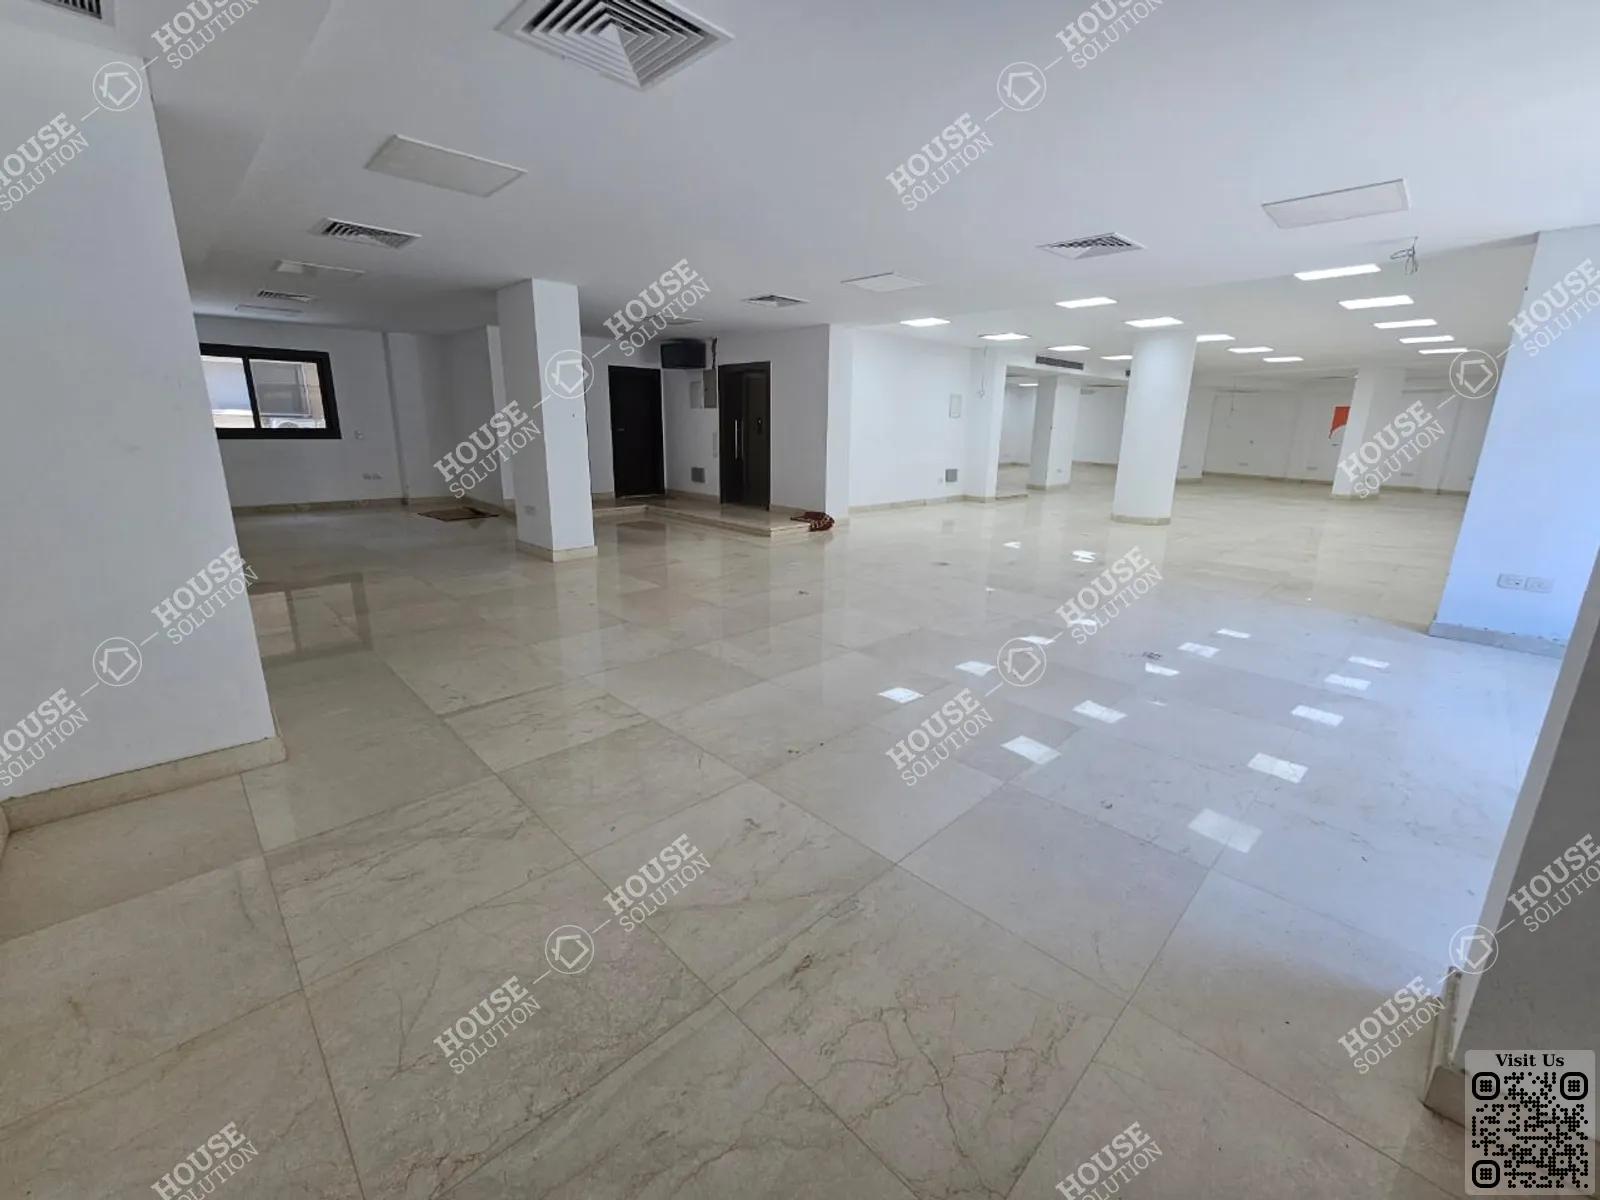 RECEPTION  @ Office spaces For Rent In Maadi Maadi Degla Area: 450 m² consists of 0 Bedrooms 2 Bathrooms Semi furnished 5 stars #5864-0